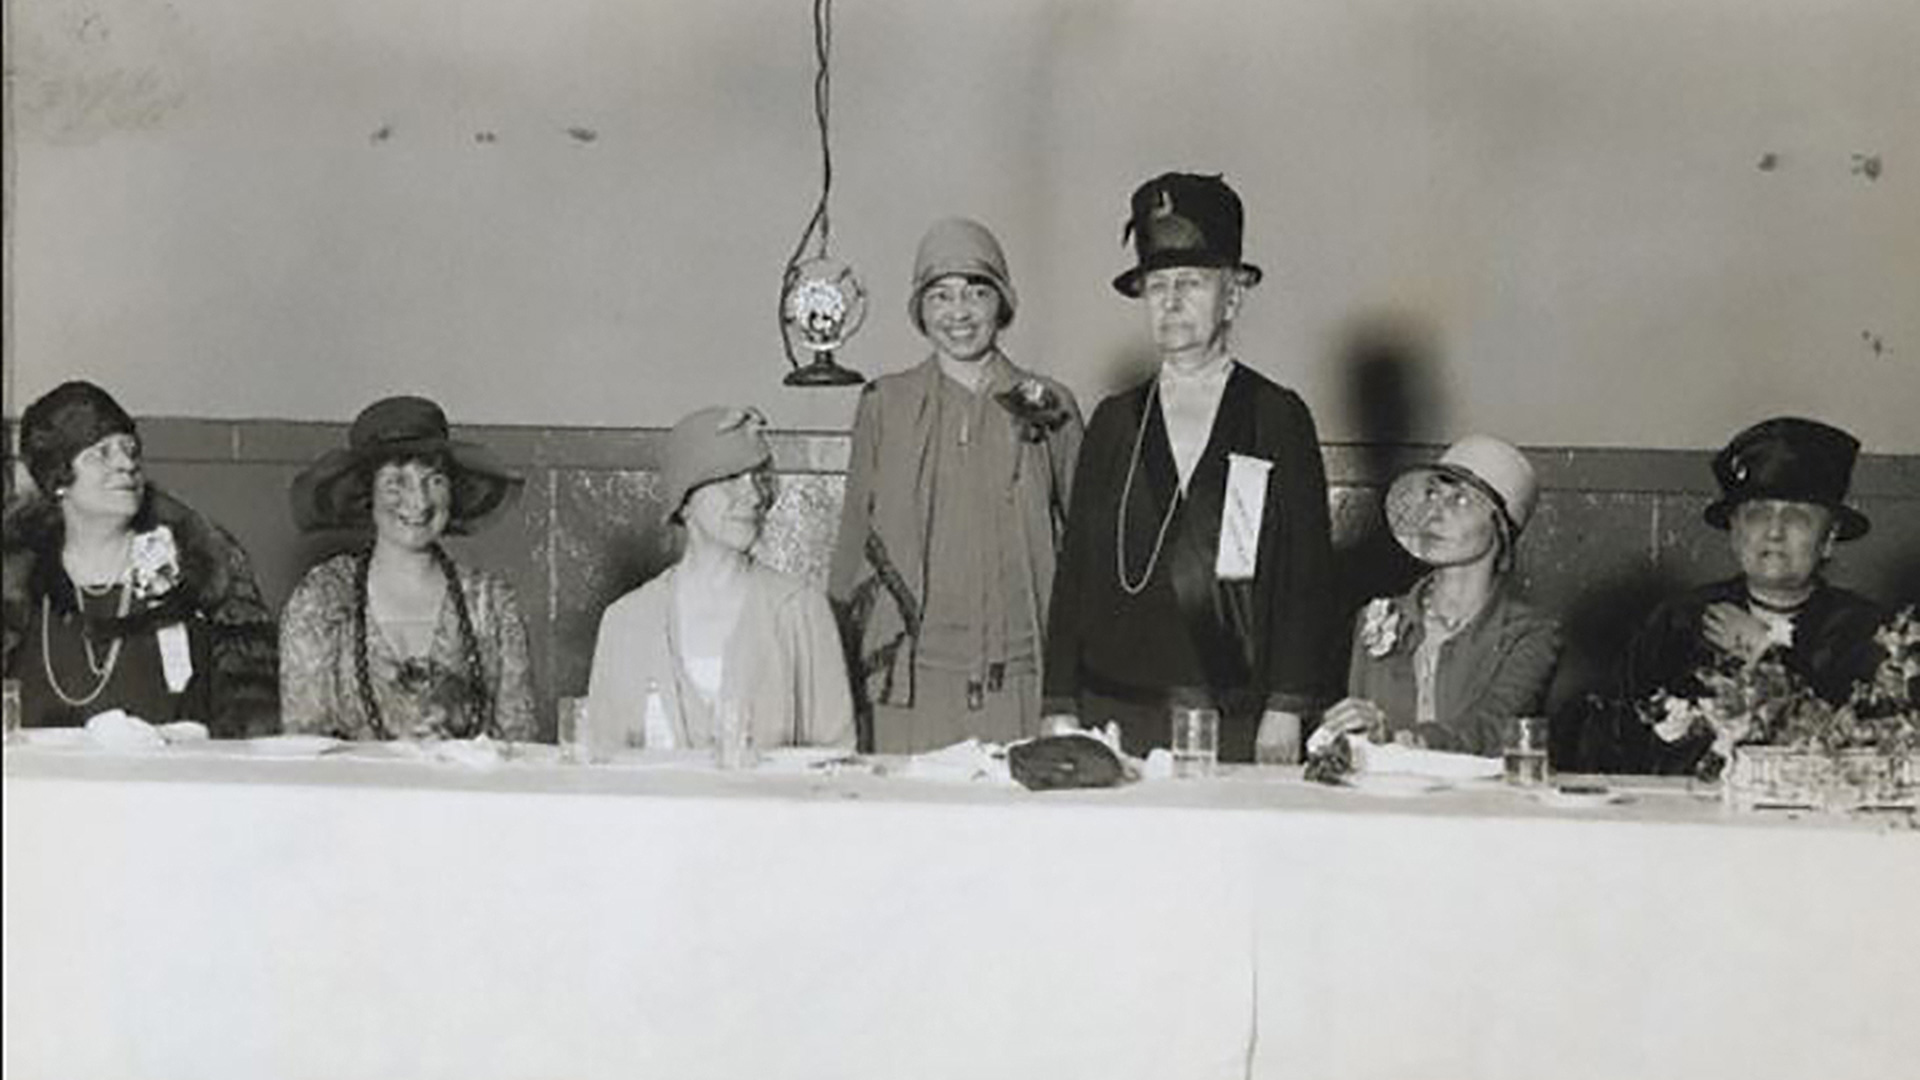 April 18, 1925: The First Woman’s World Fair Began in Chicago